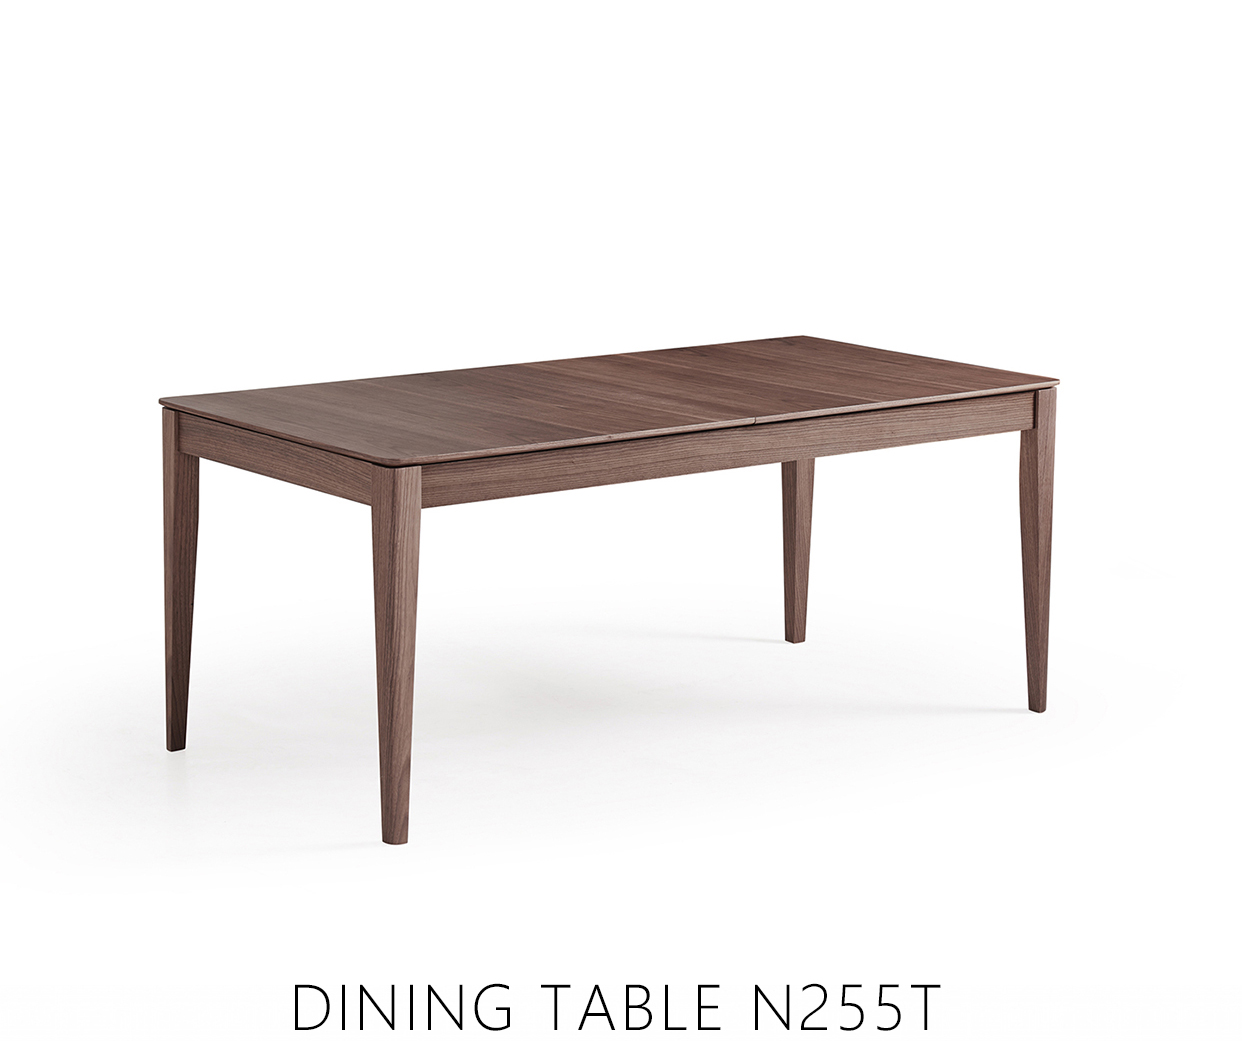 DINING TABLE N255T